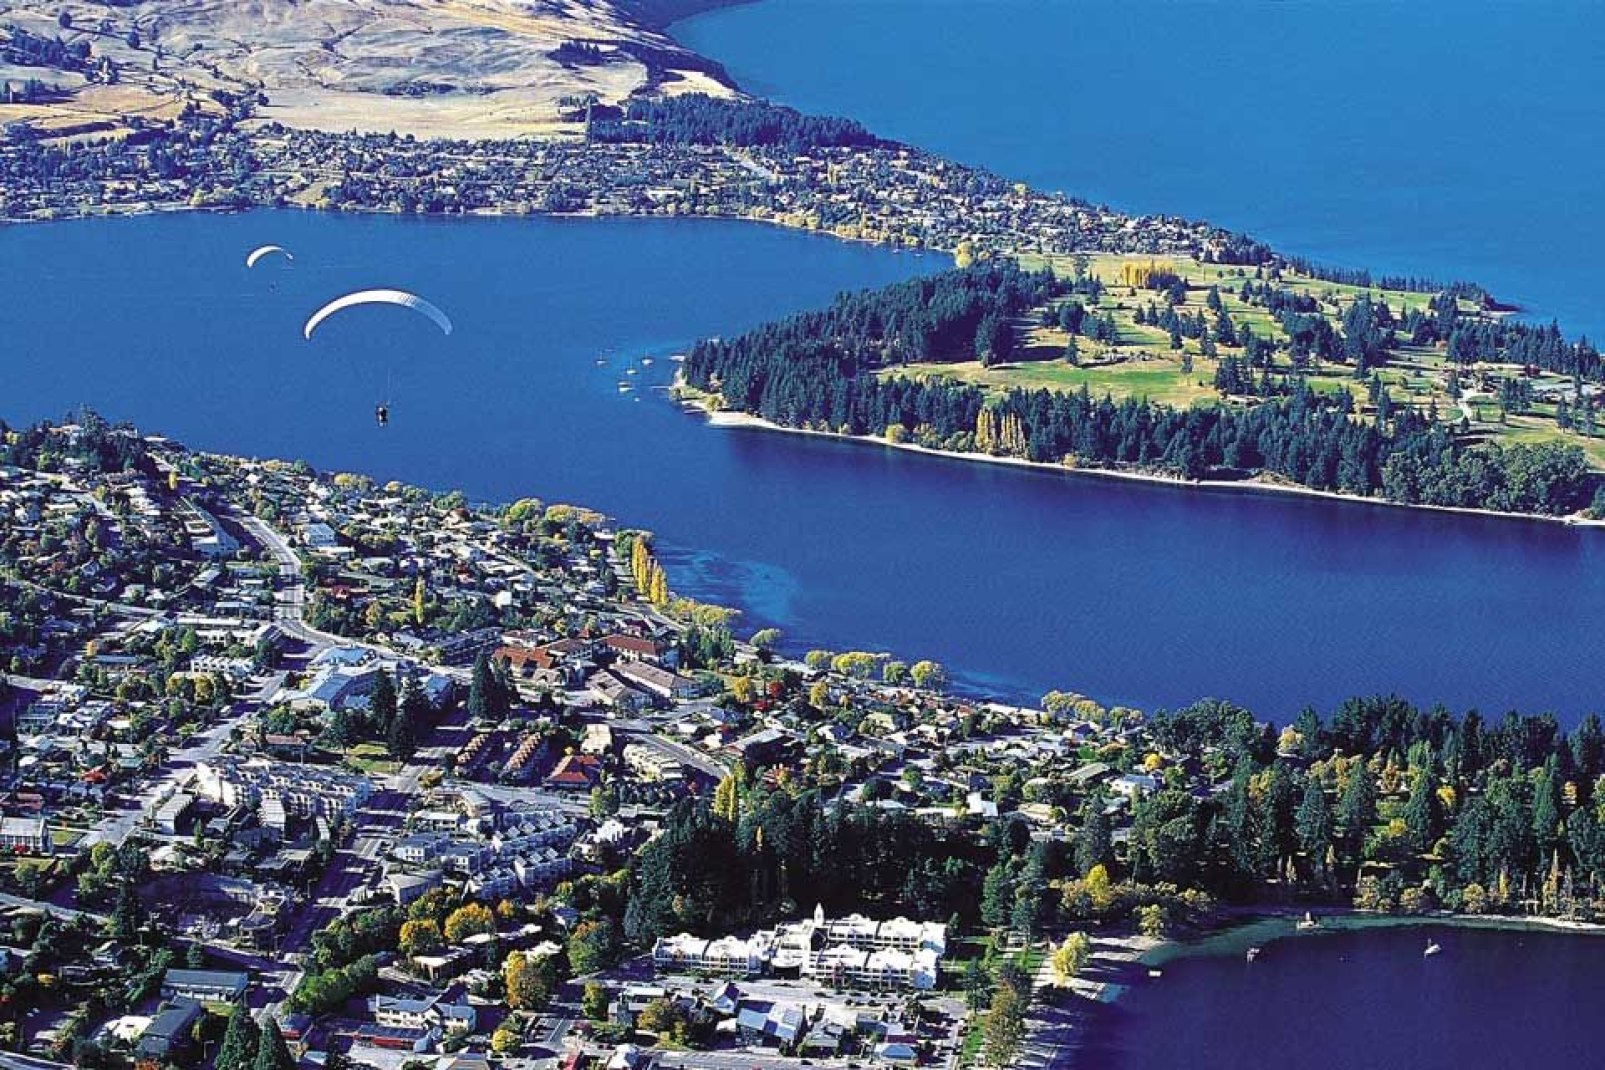 It is possible to go skydiving and admire the magnificent landscapes around the city from the sky here.